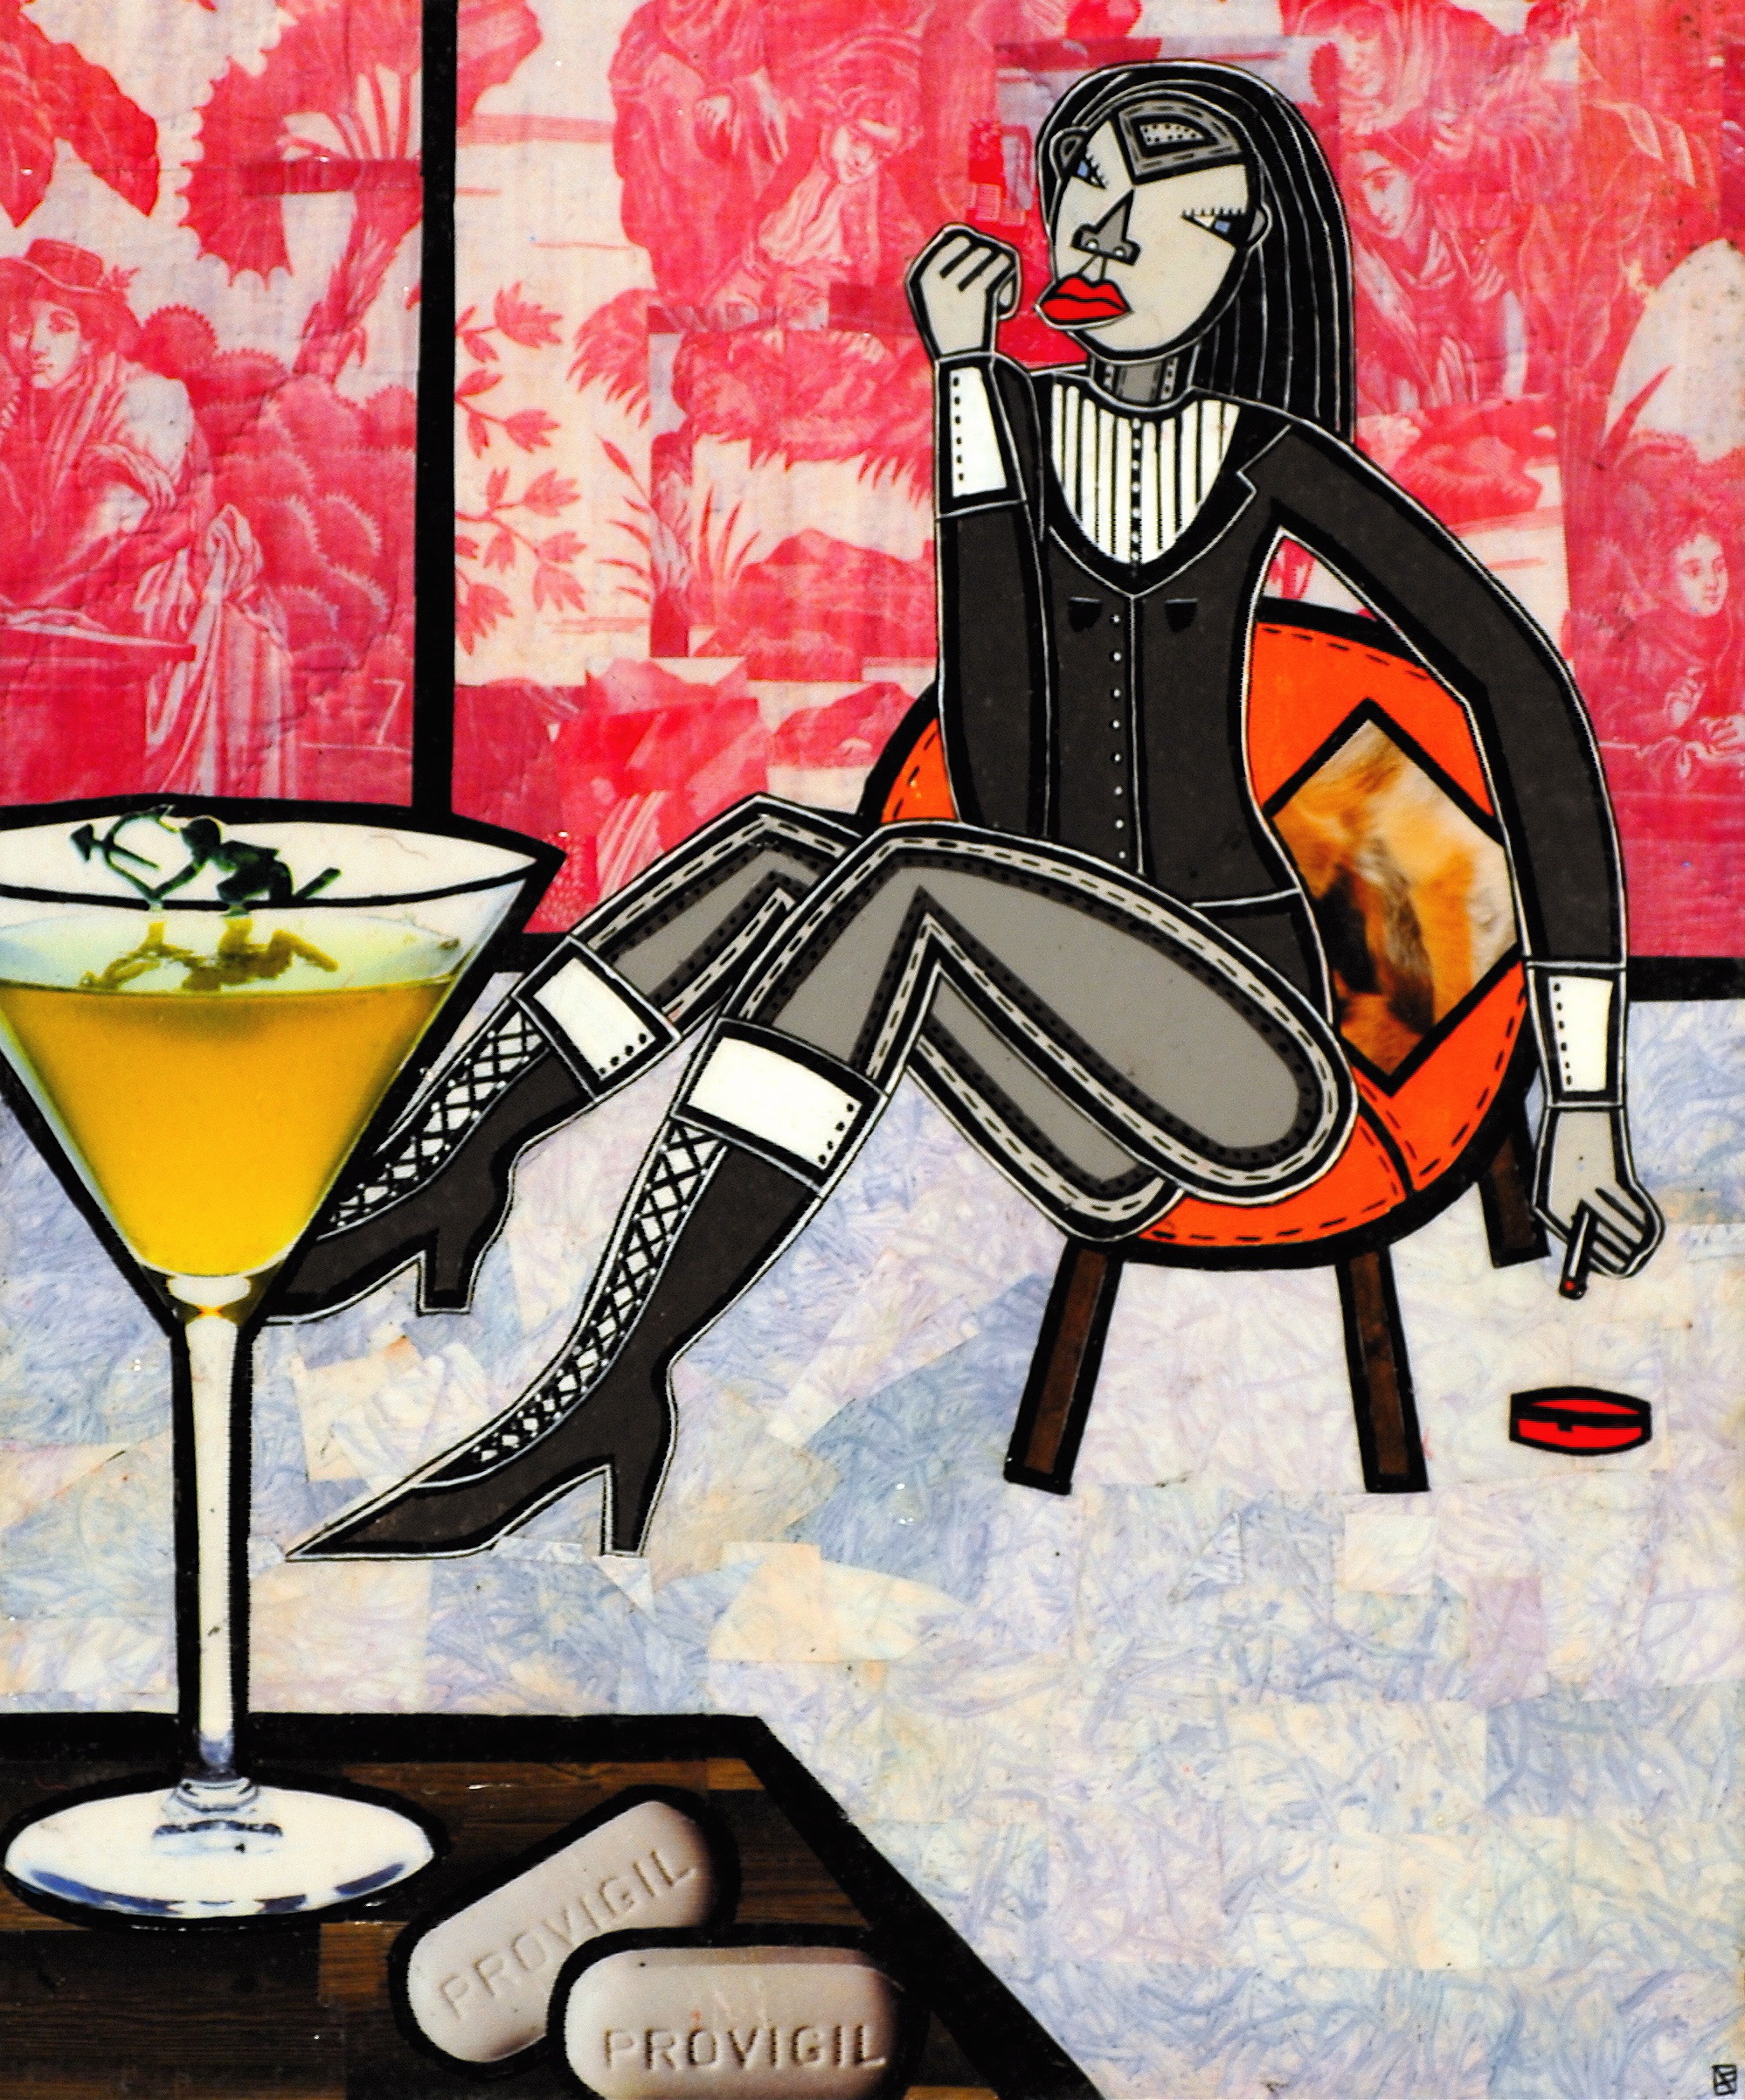 Drinking and Thinking, acrylic and paper collage on canvas, 12"x 10", 2007, private collection